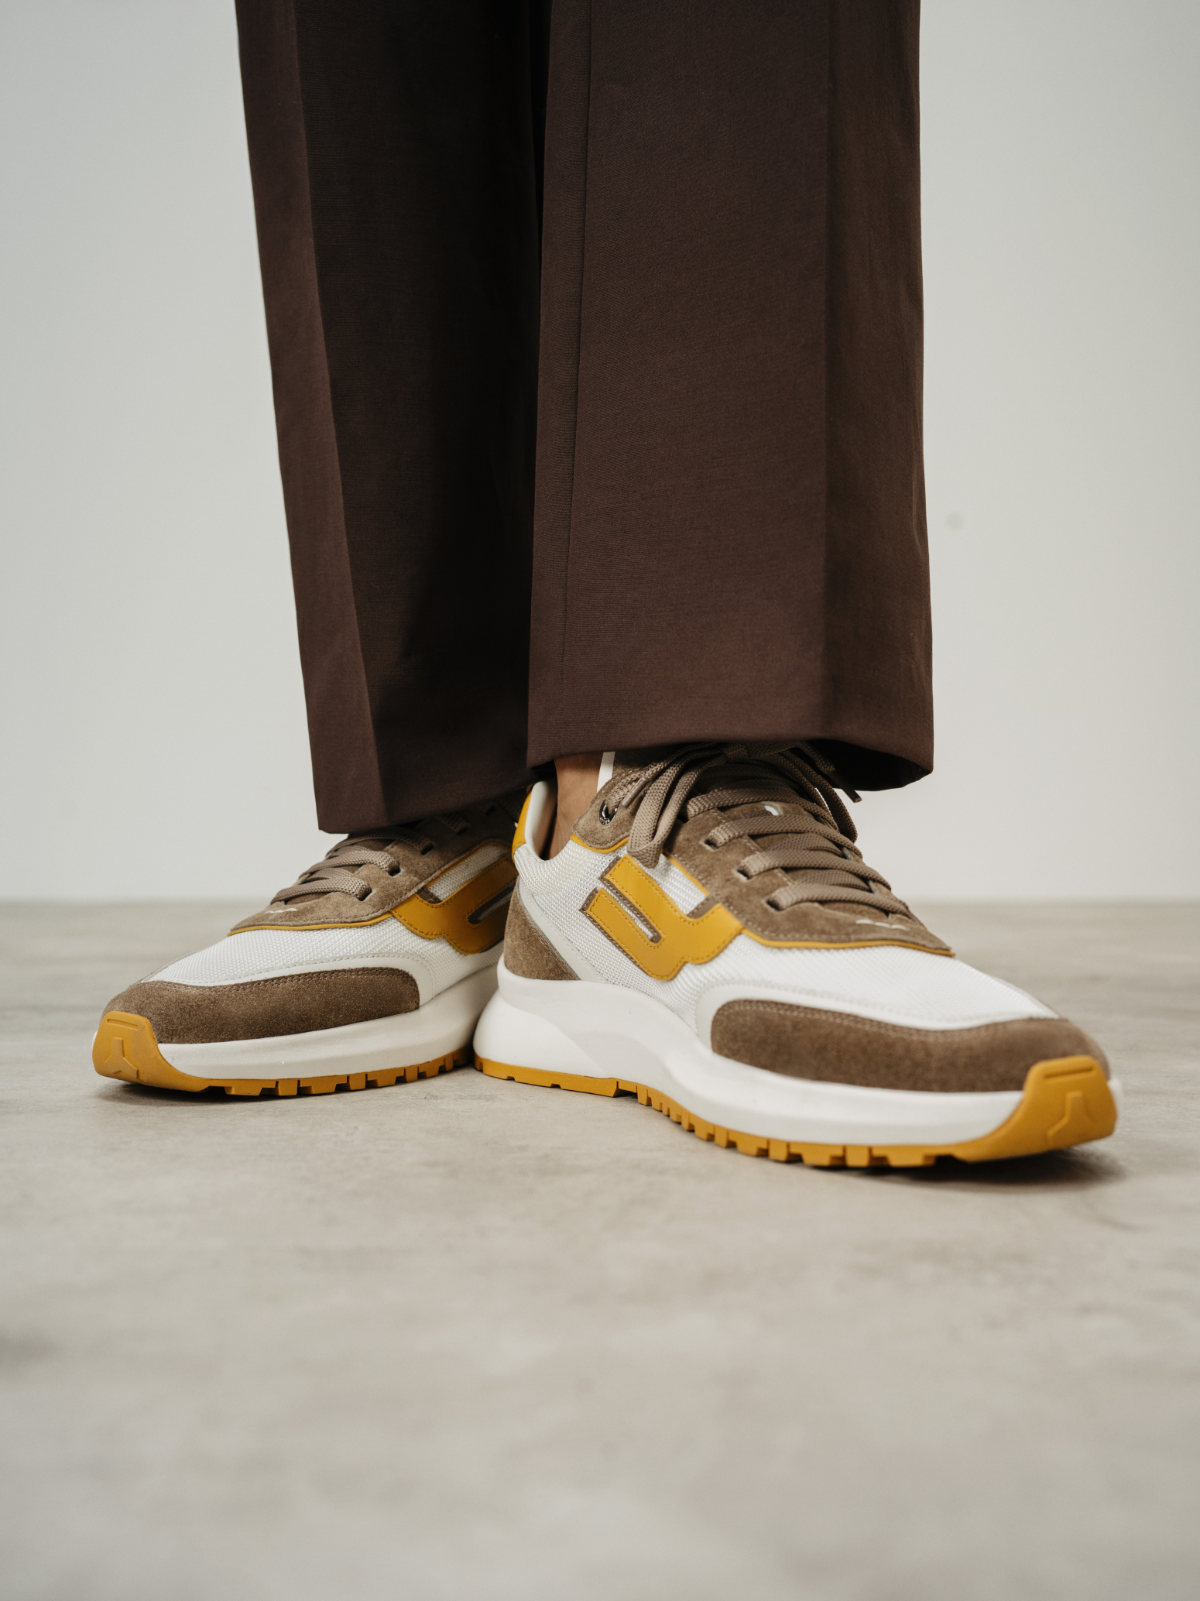 Bally Presents Its New Spring/Summer 2022 Collection: Art Of Utility